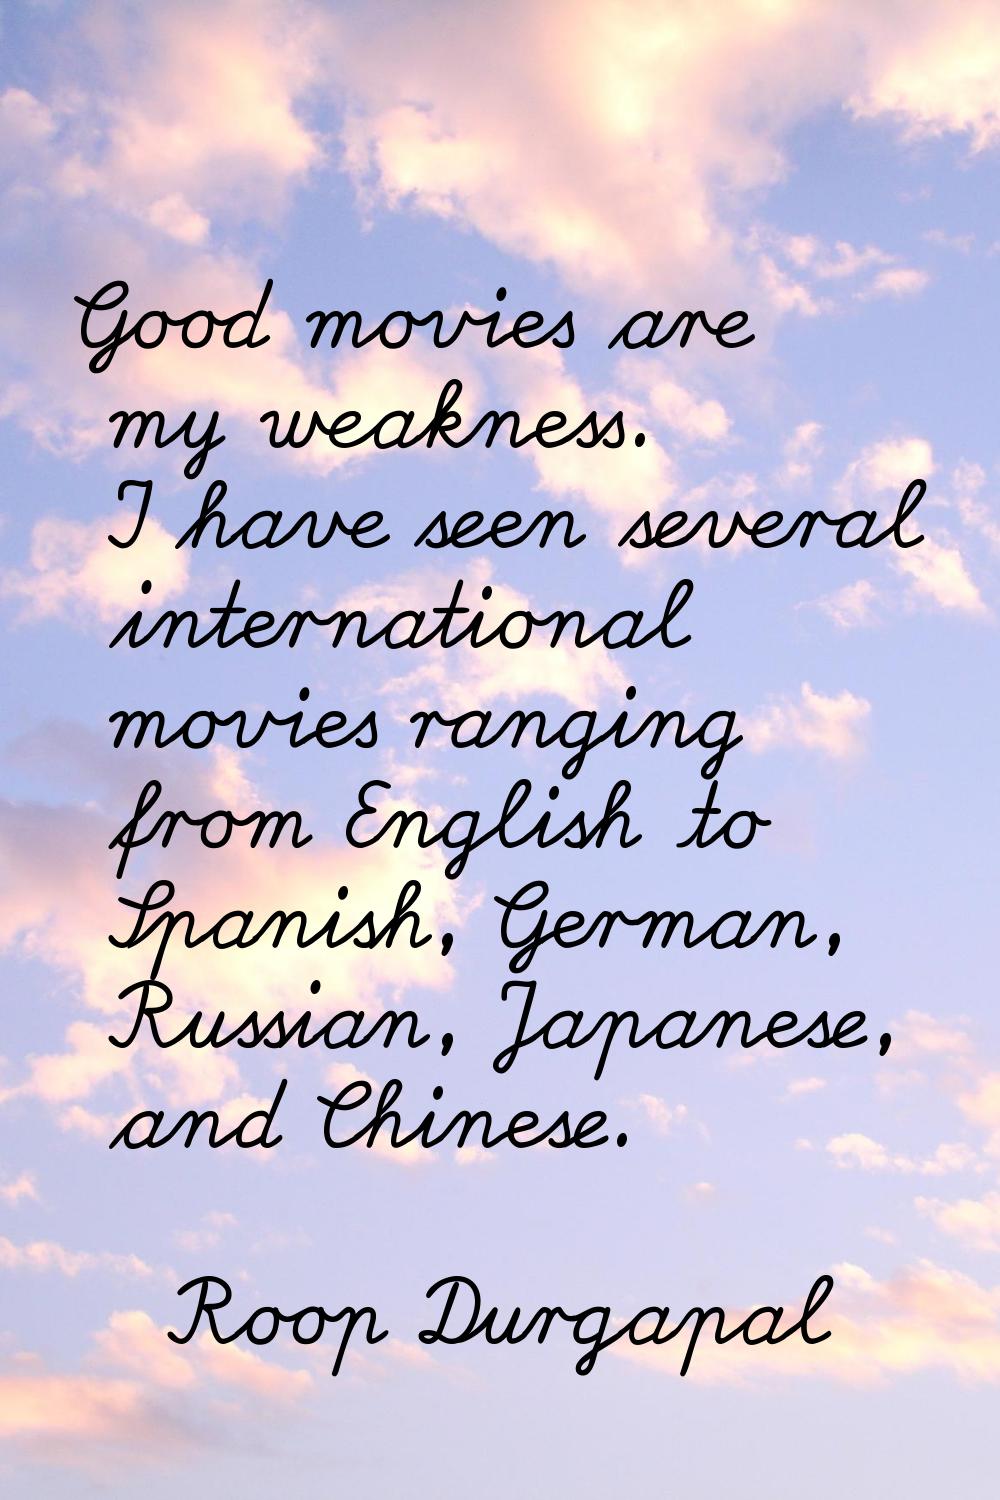 Good movies are my weakness. I have seen several international movies ranging from English to Spani